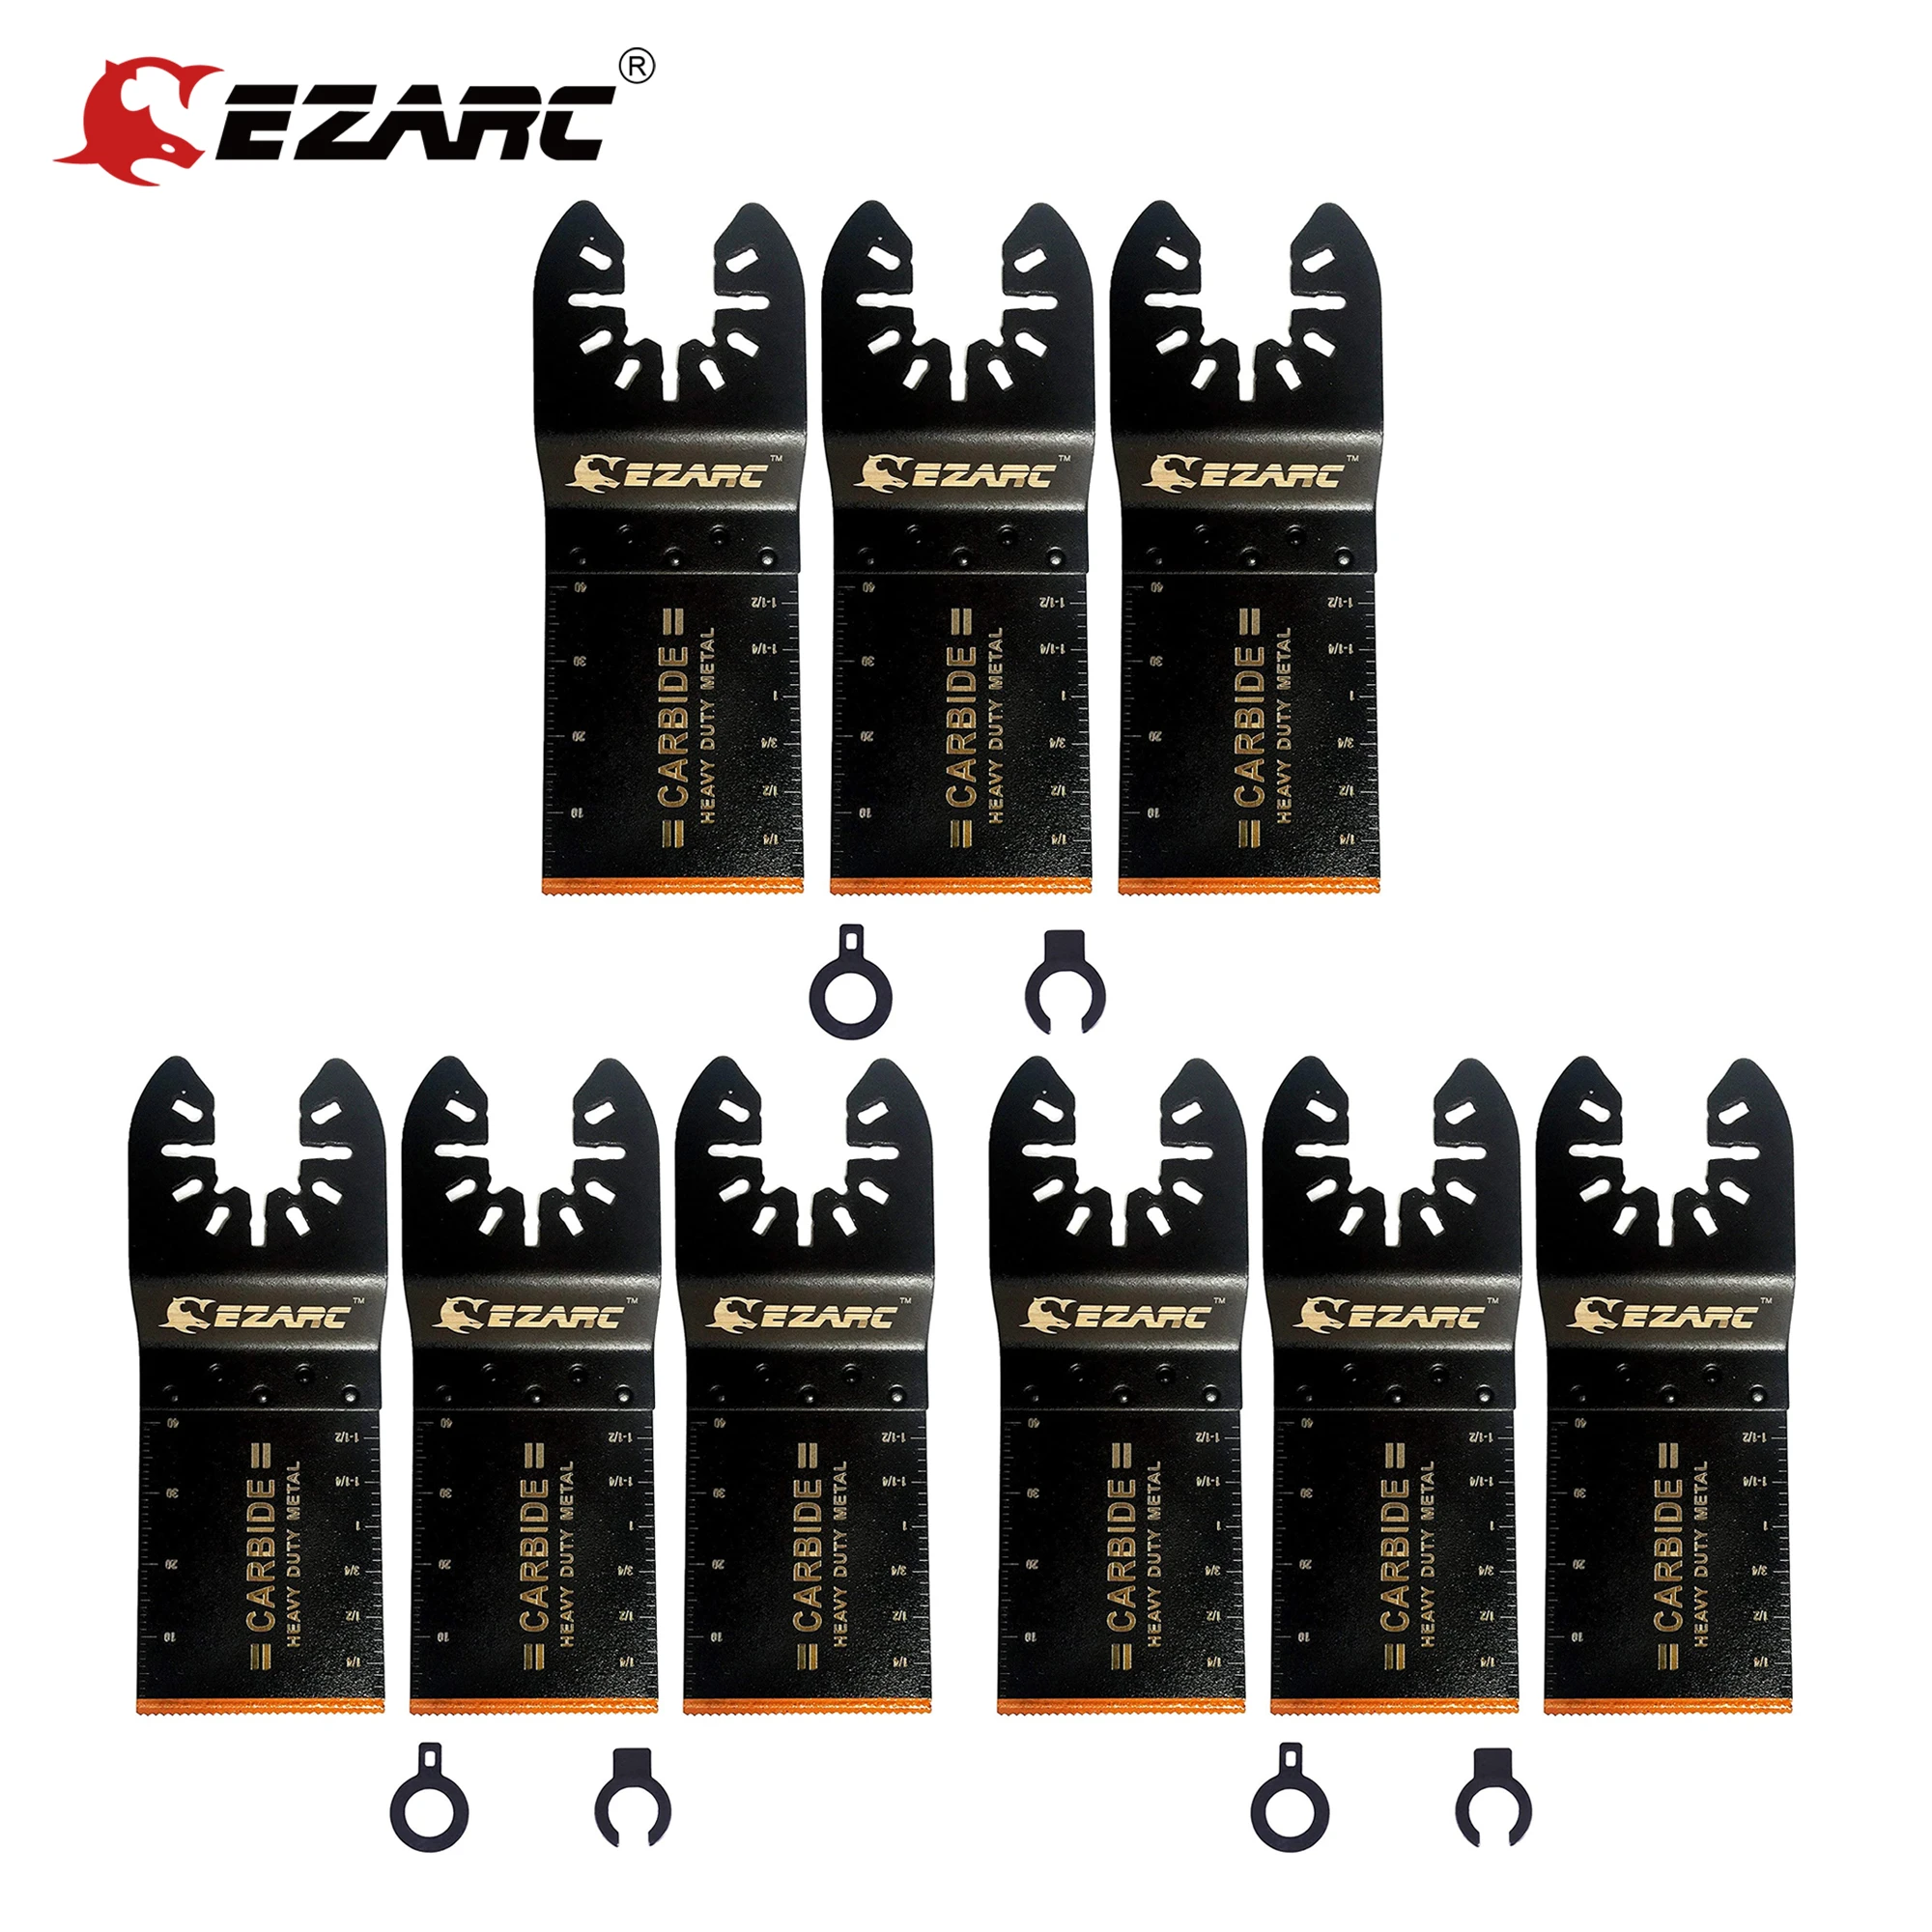 EZARC 3pcs Carbide Tooth Blade Oscillating Saw Blades Multitool Oscillating Tool Accessories for Cutting Metal,Steel Nails,Bolts